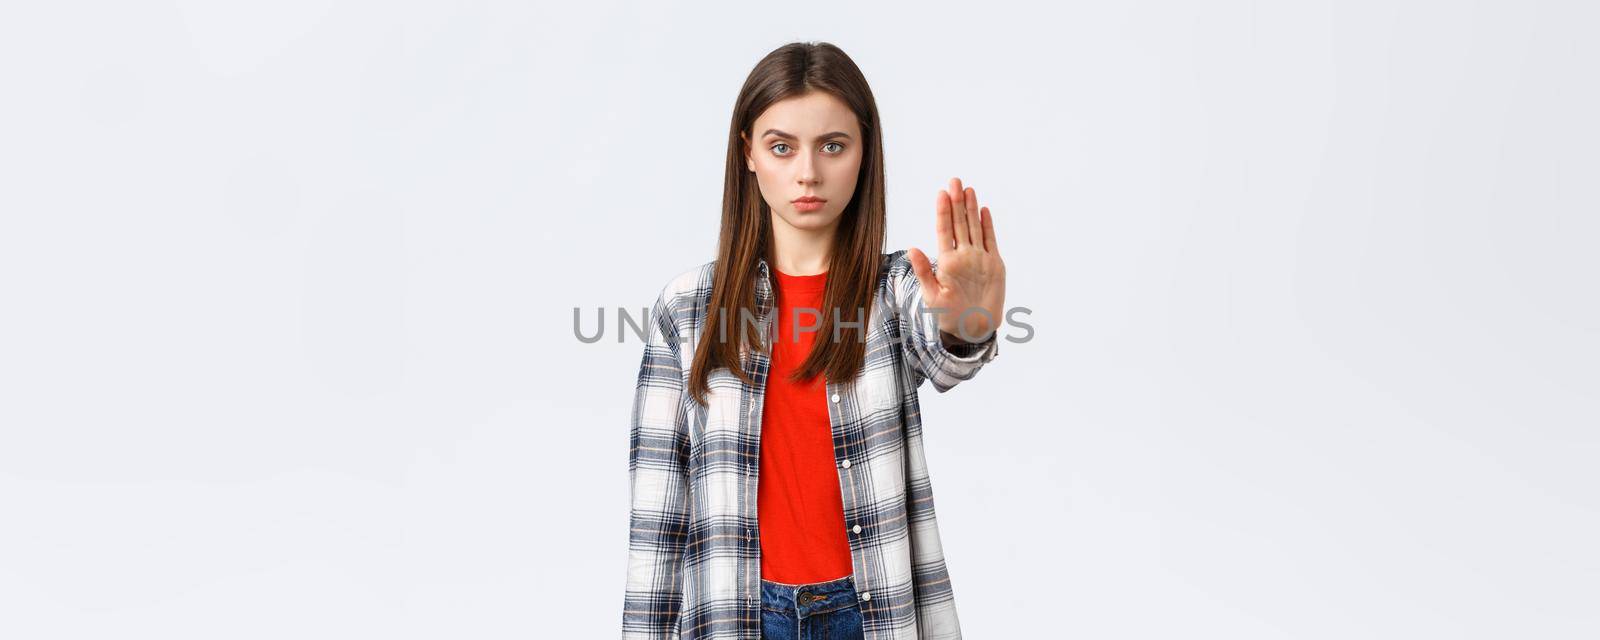 Lifestyle, different emotions, leisure activities concept. Time to stop. Serious young woman in casual outfit, stretch hand forward to prohibit, restrict or forbid something, white background by Benzoix